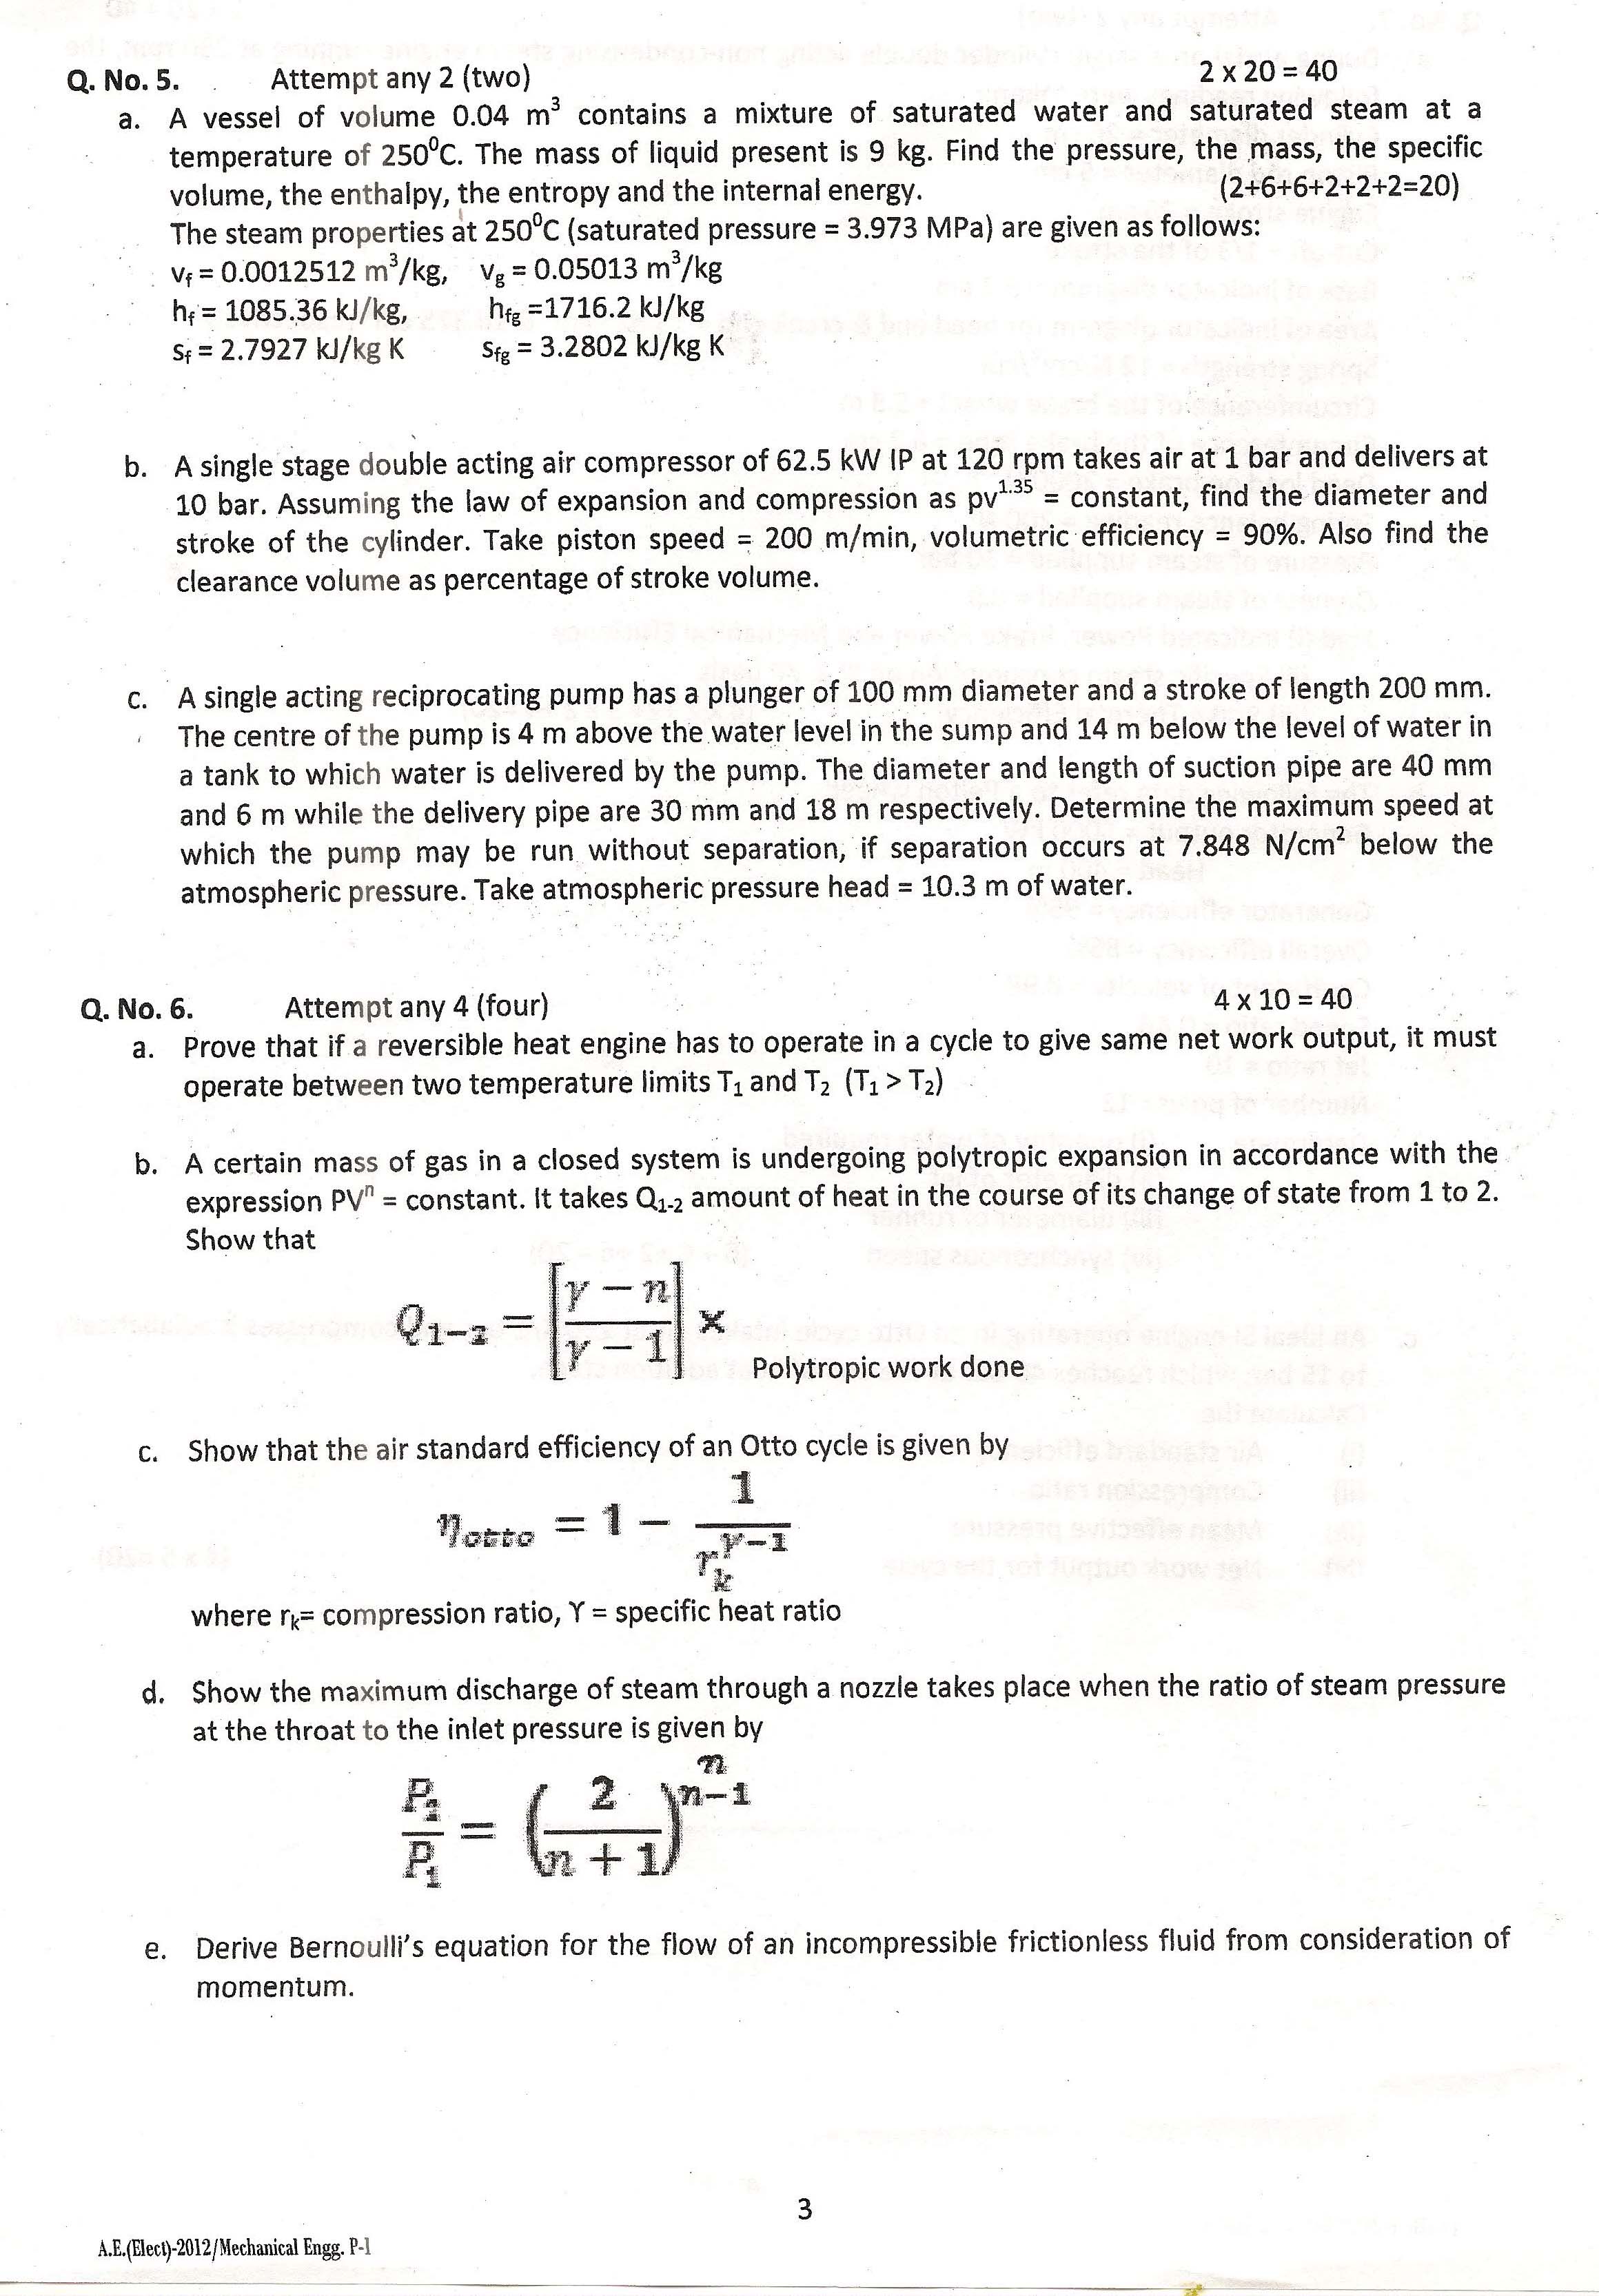 APPSC AE Electrical Exam 2012 Mechanical Engineering Paper I 3